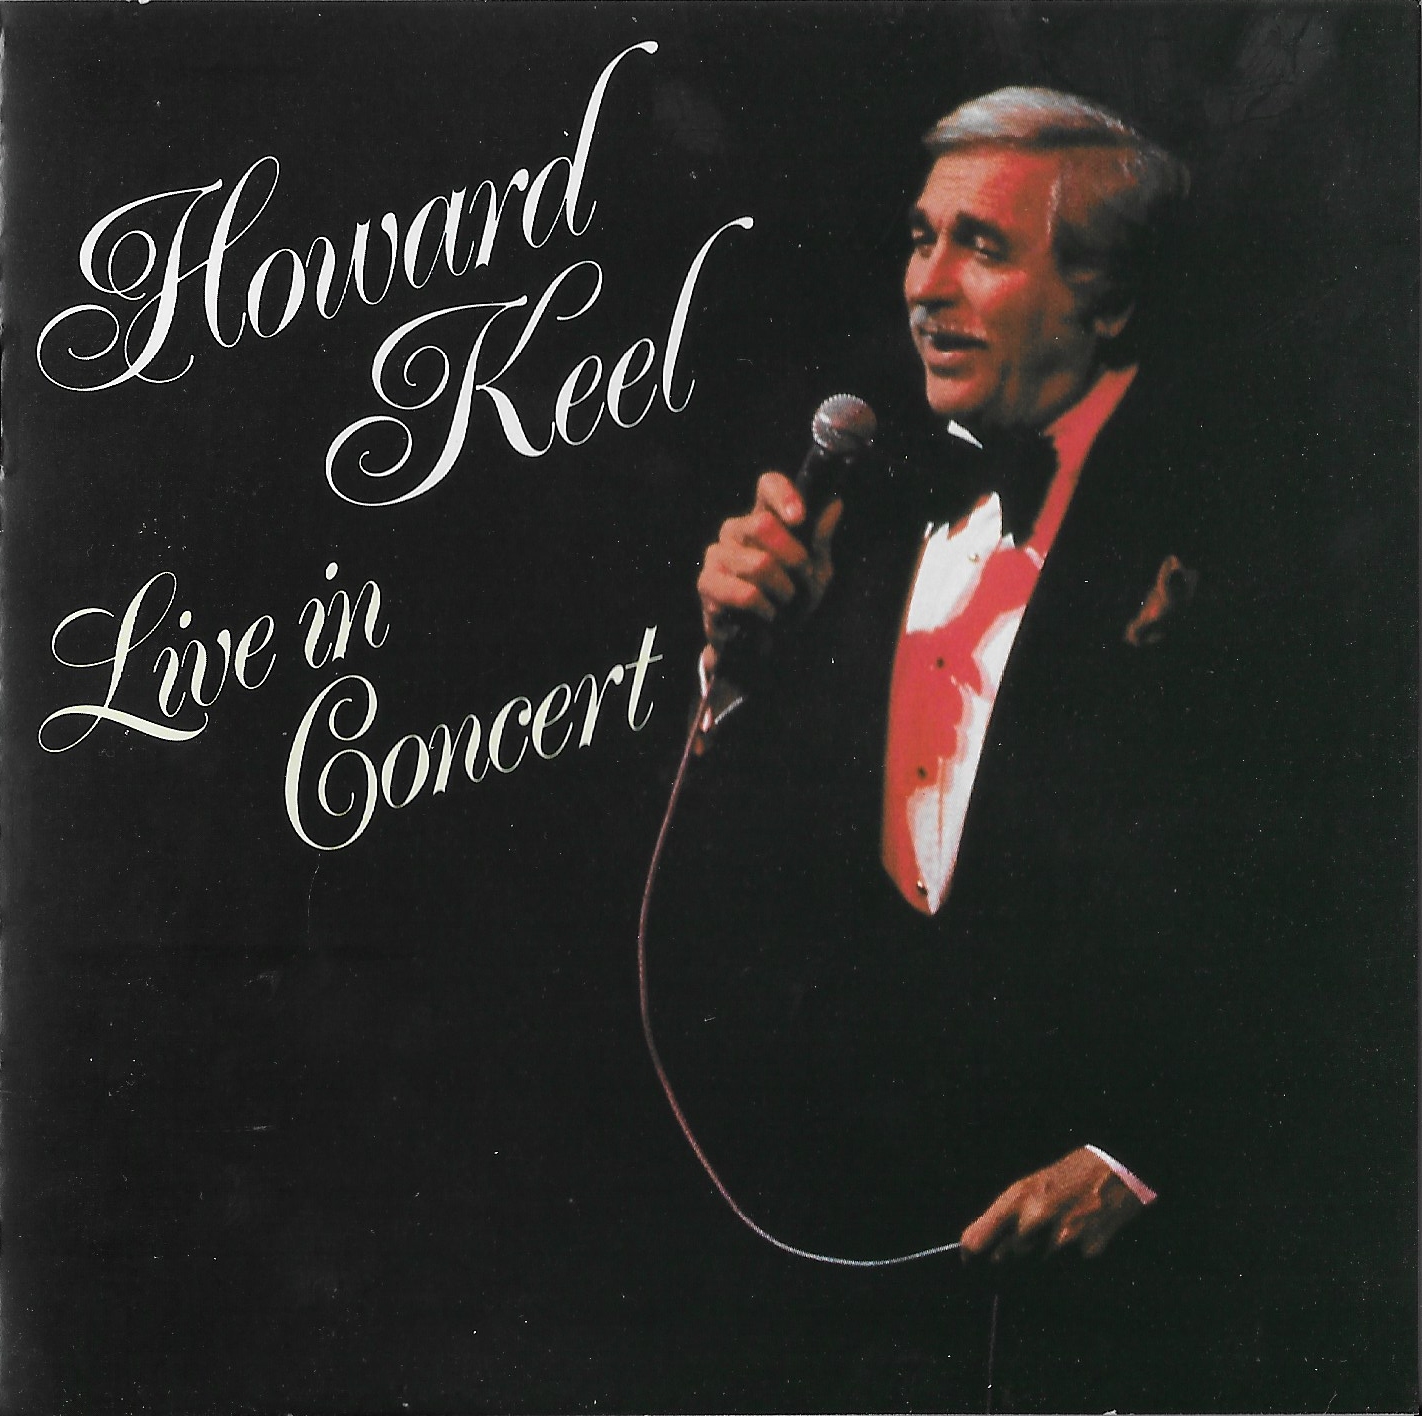 Picture of Howard Keel - live in concert by artist Howard Keel from the BBC cds - Records and Tapes library